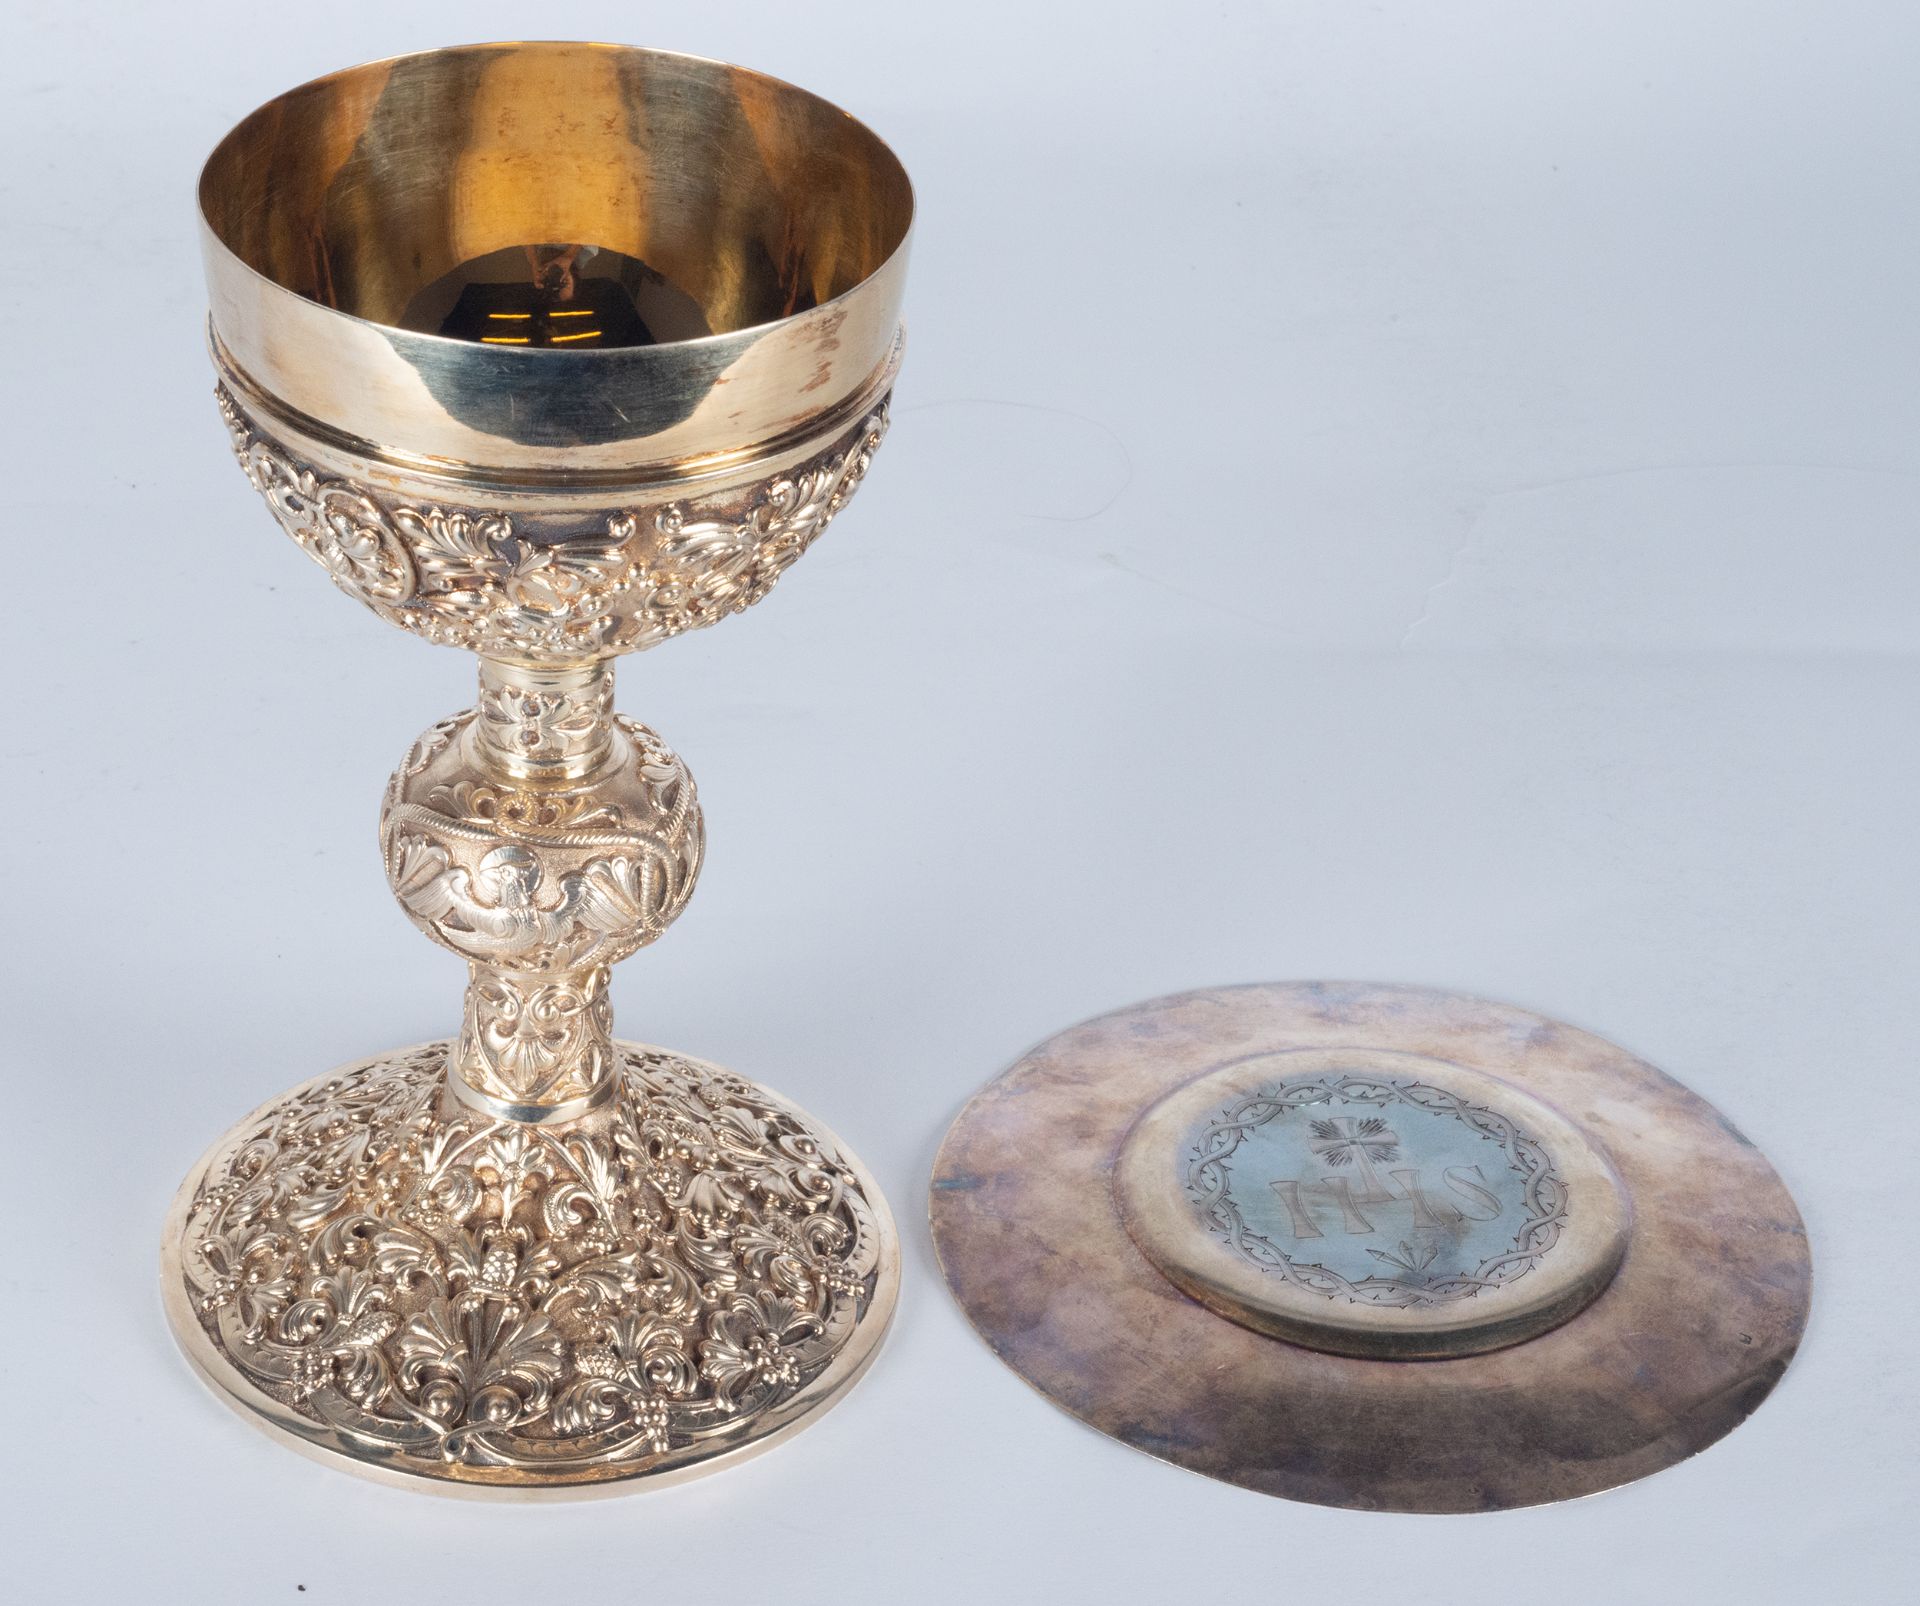 Important Liturgical Chalice in Golden 925 Sterling Silver with Salvilla, marks of Córdoba, peimra h - Image 2 of 6